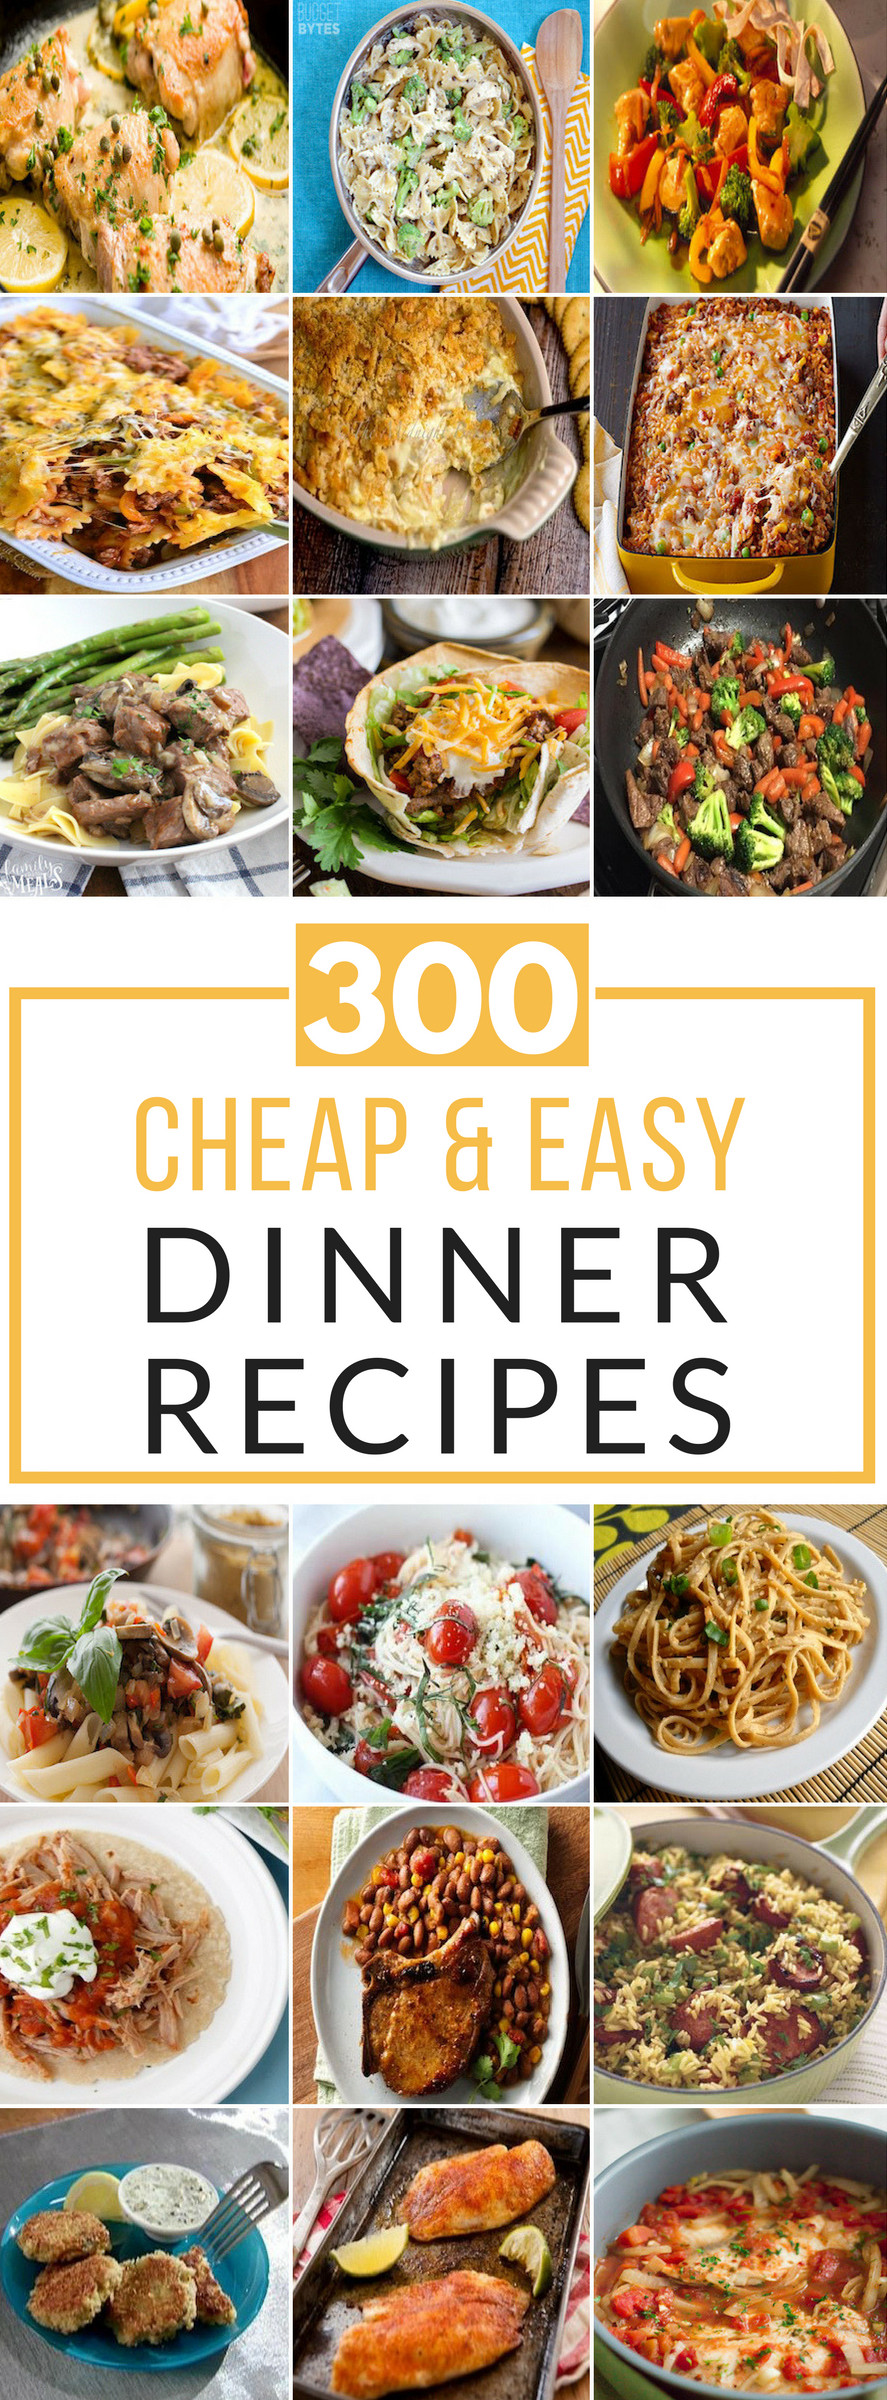 Inexpensive Dinner Ideas
 300 Cheap and Easy Dinner Recipes Prudent Penny Pincher